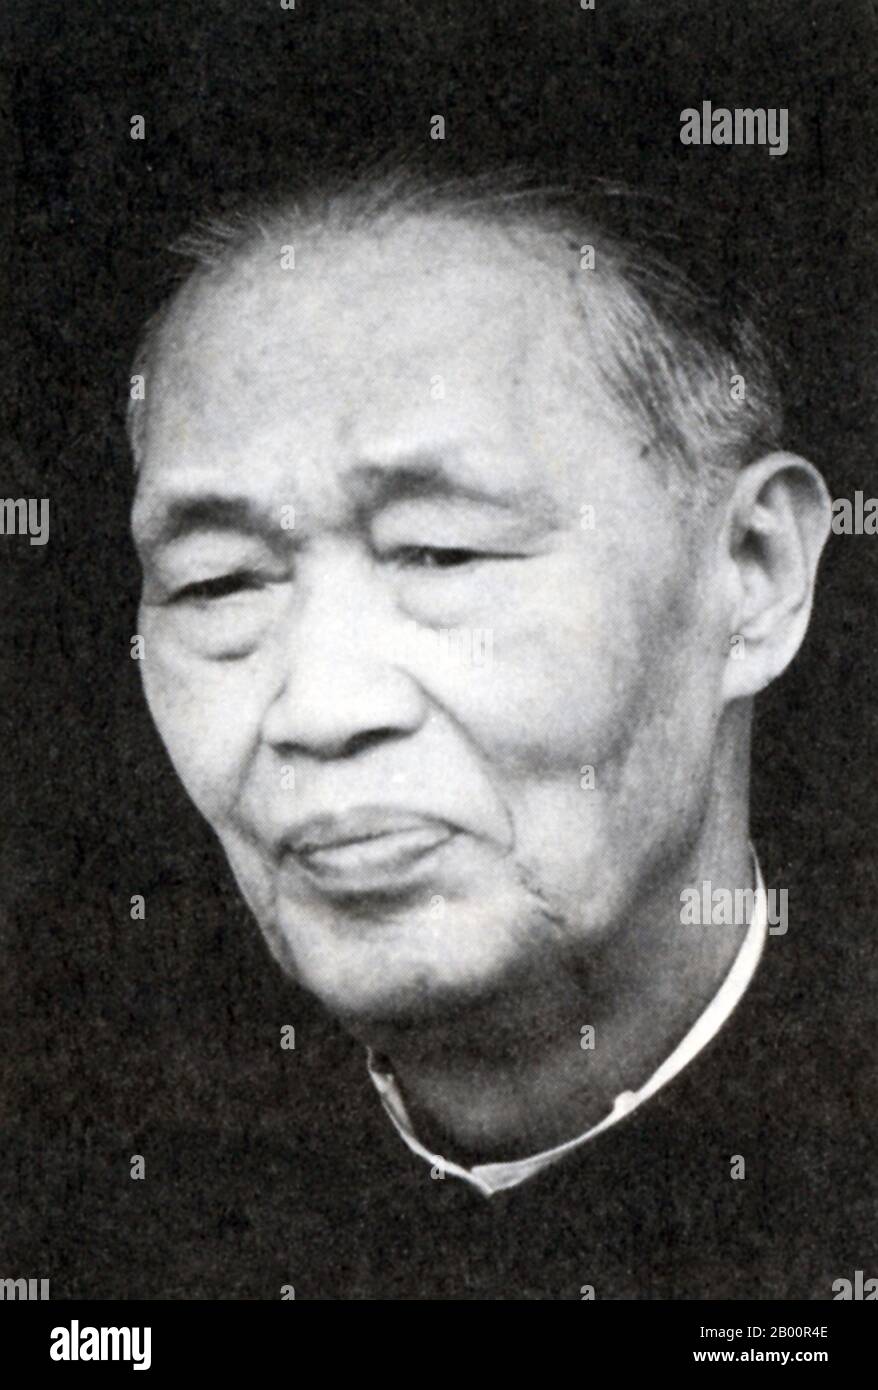 Vietnam: Hoang Van Hoan (1905-1991).  Hoang Van Hoan (1905-1991), a personal friend of Ho Chi Minh, was a founding member of the Indochinese Communist Party, and a Politburo member of the Lao Dong Party (Vietnam Workers' Party-VWP) from 1960 to 1976. He lost much of his influence after Ho Chi Minh's death in 1969, and particularly after the Fourth National Party Congress in 1977, when the Vietnamese Communists shifted to a pro-Soviet position. Hoang defected to China and surfaced in Beijing in July 1979. Stock Photo